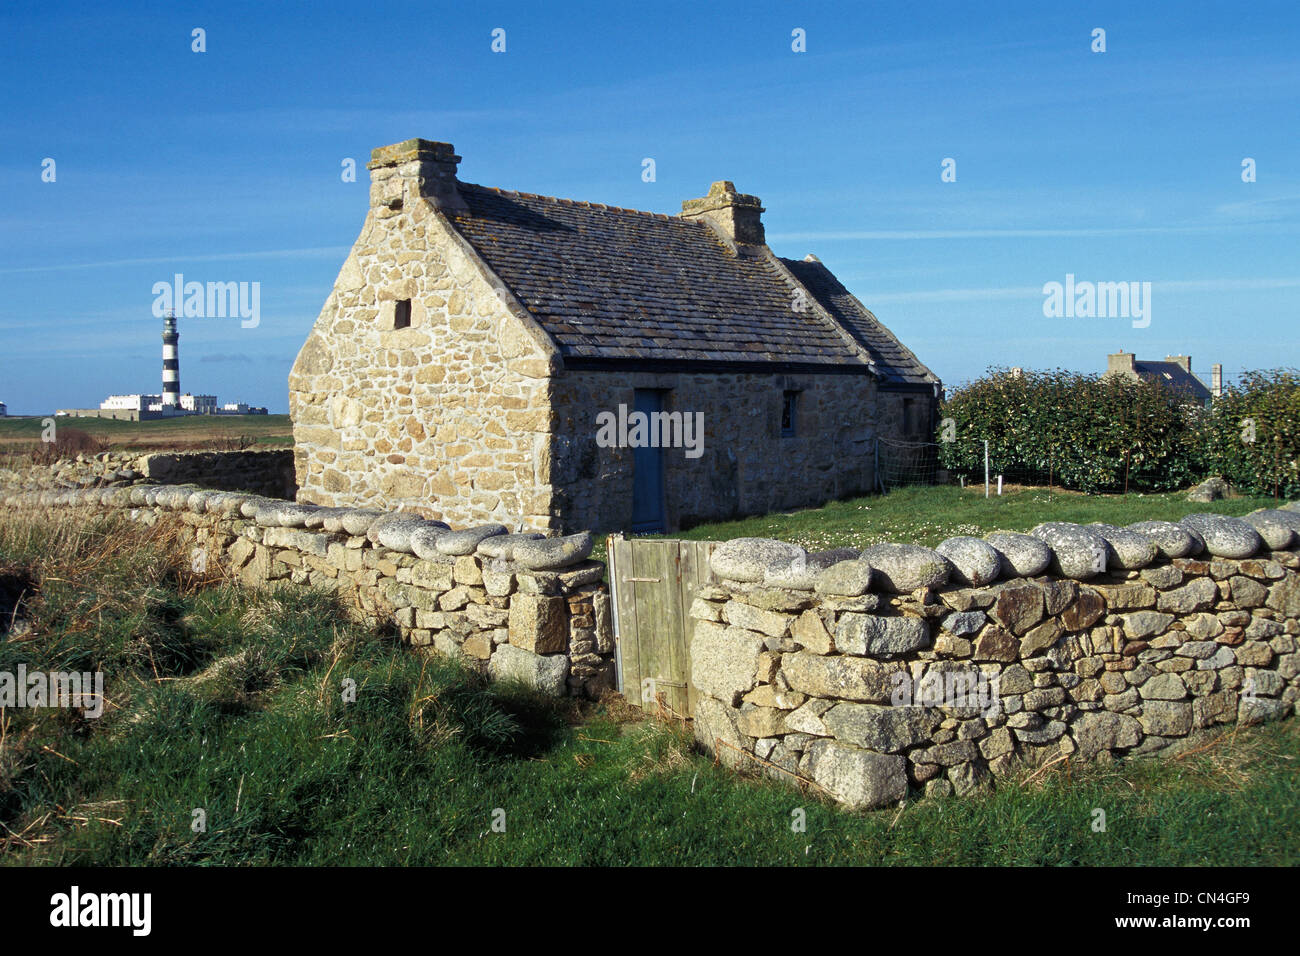 France, Finistere, Ile d'Ouessant, traditional house Stock Photo